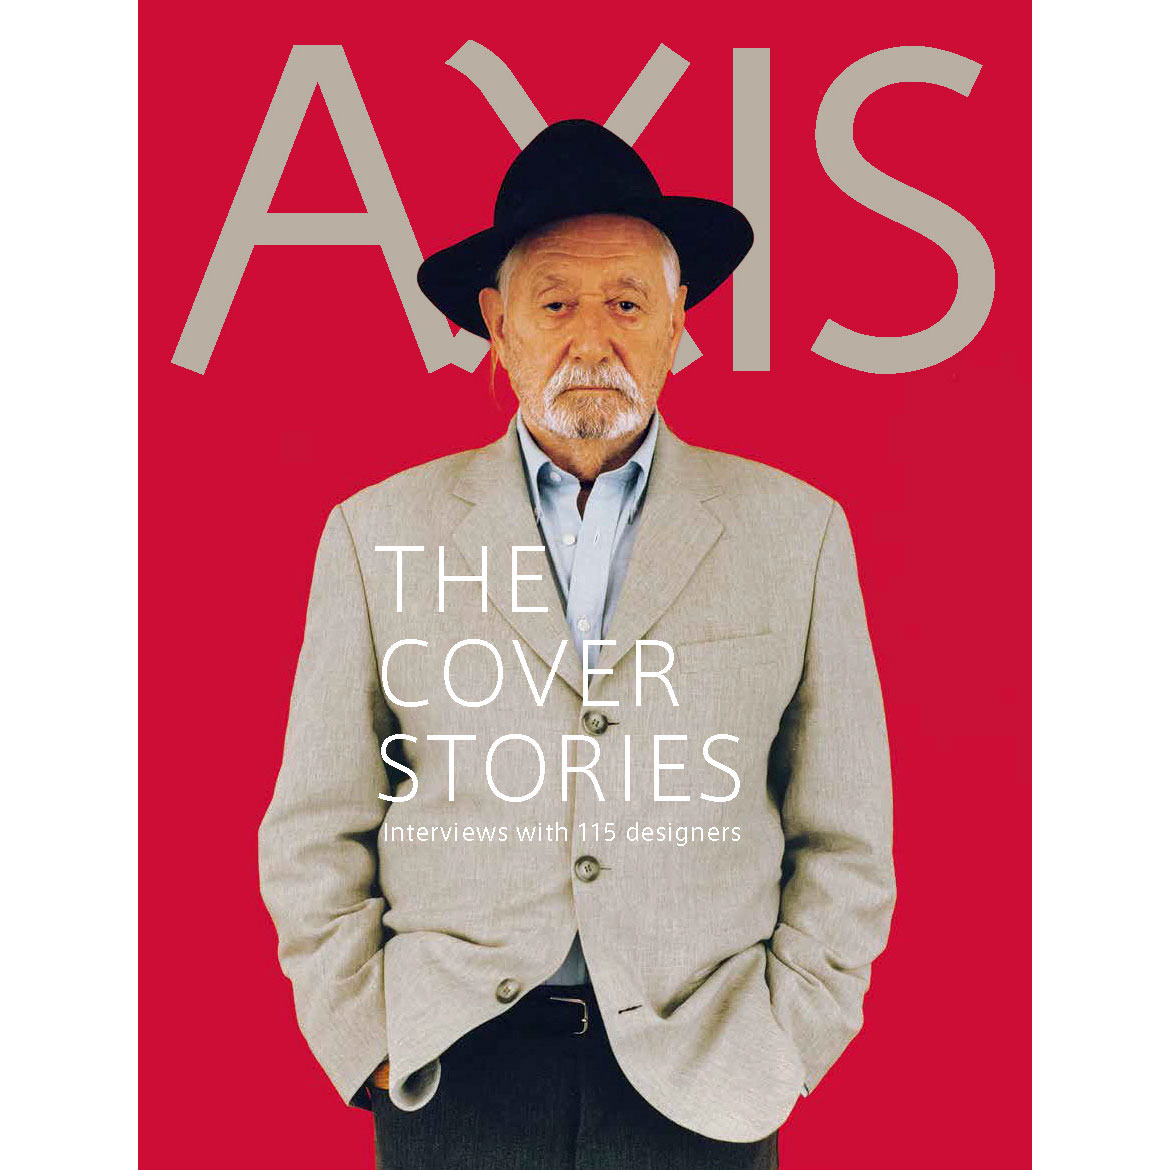 AXIS THE COVER STORIES Interviews with 115 designers